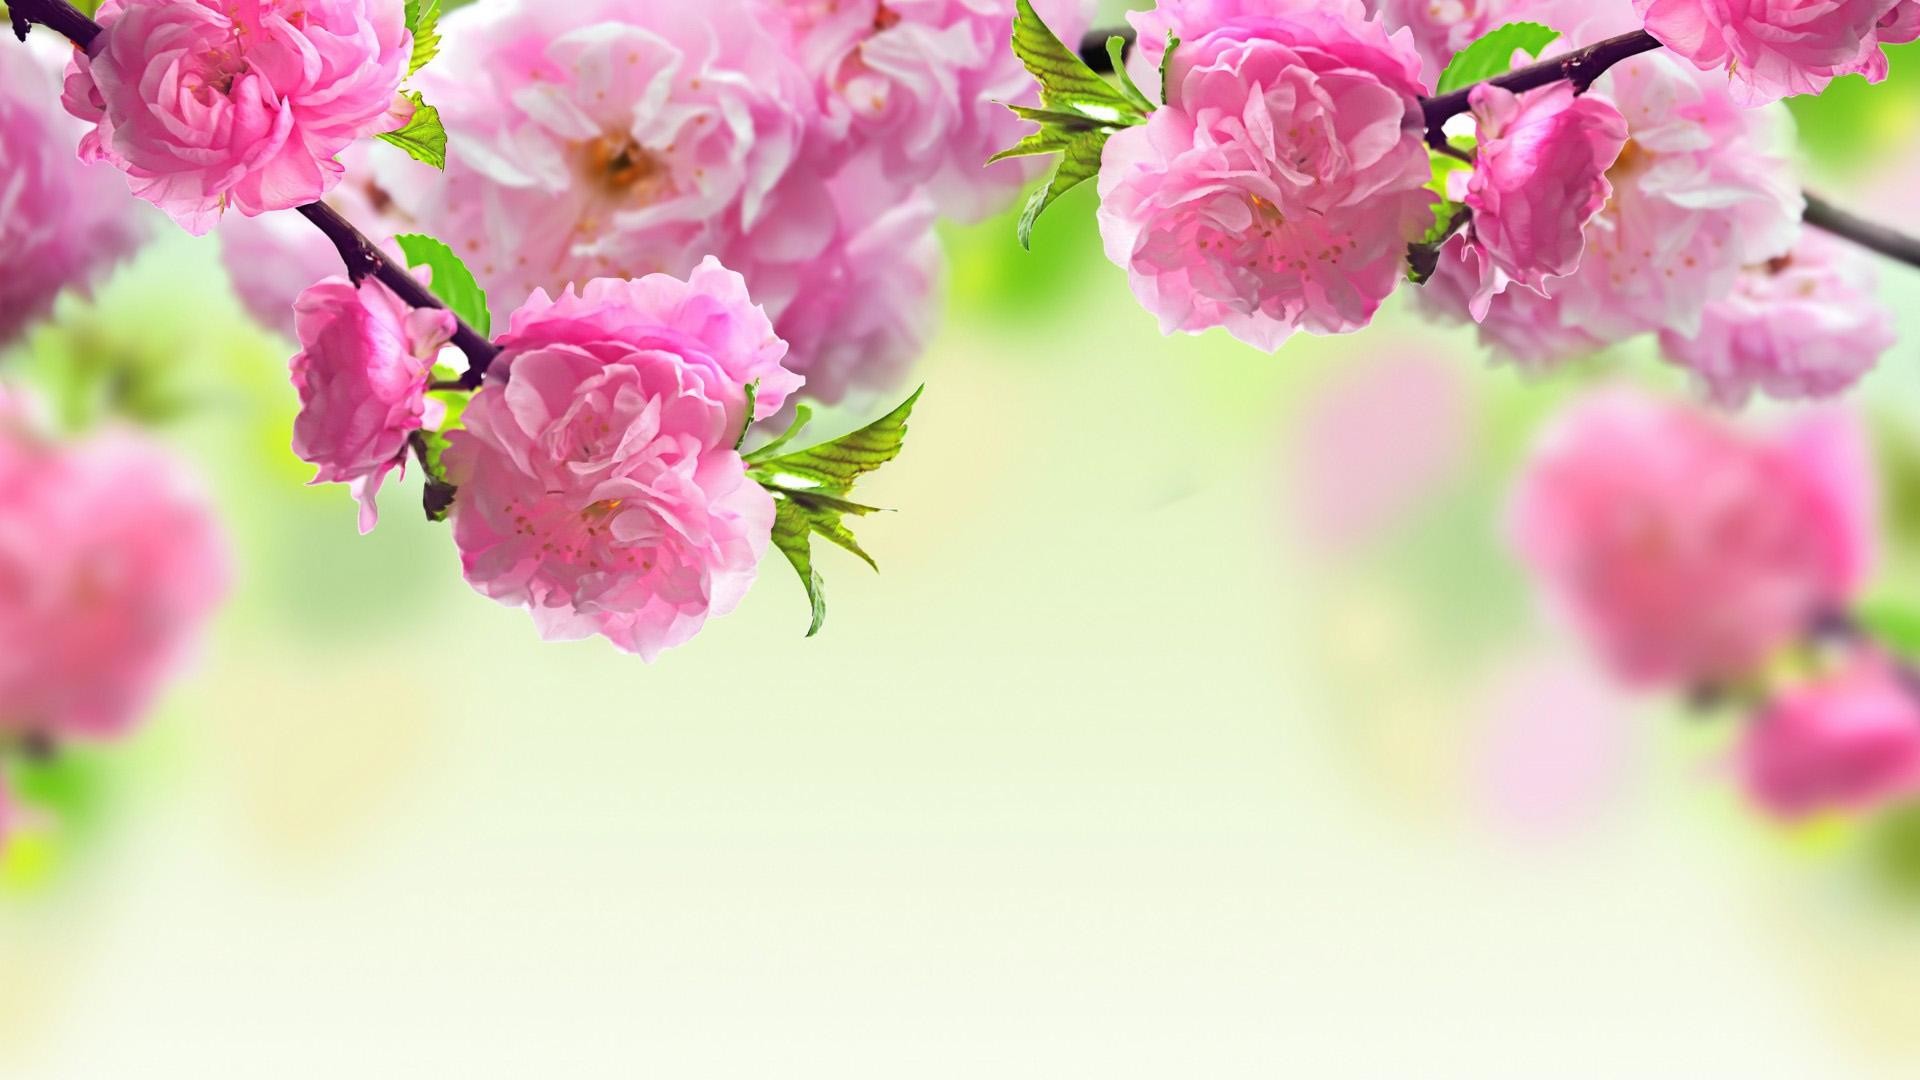 1920x1080 ... Wallpapers Spring | HD Wallpapers Backgrounds of Your Choice